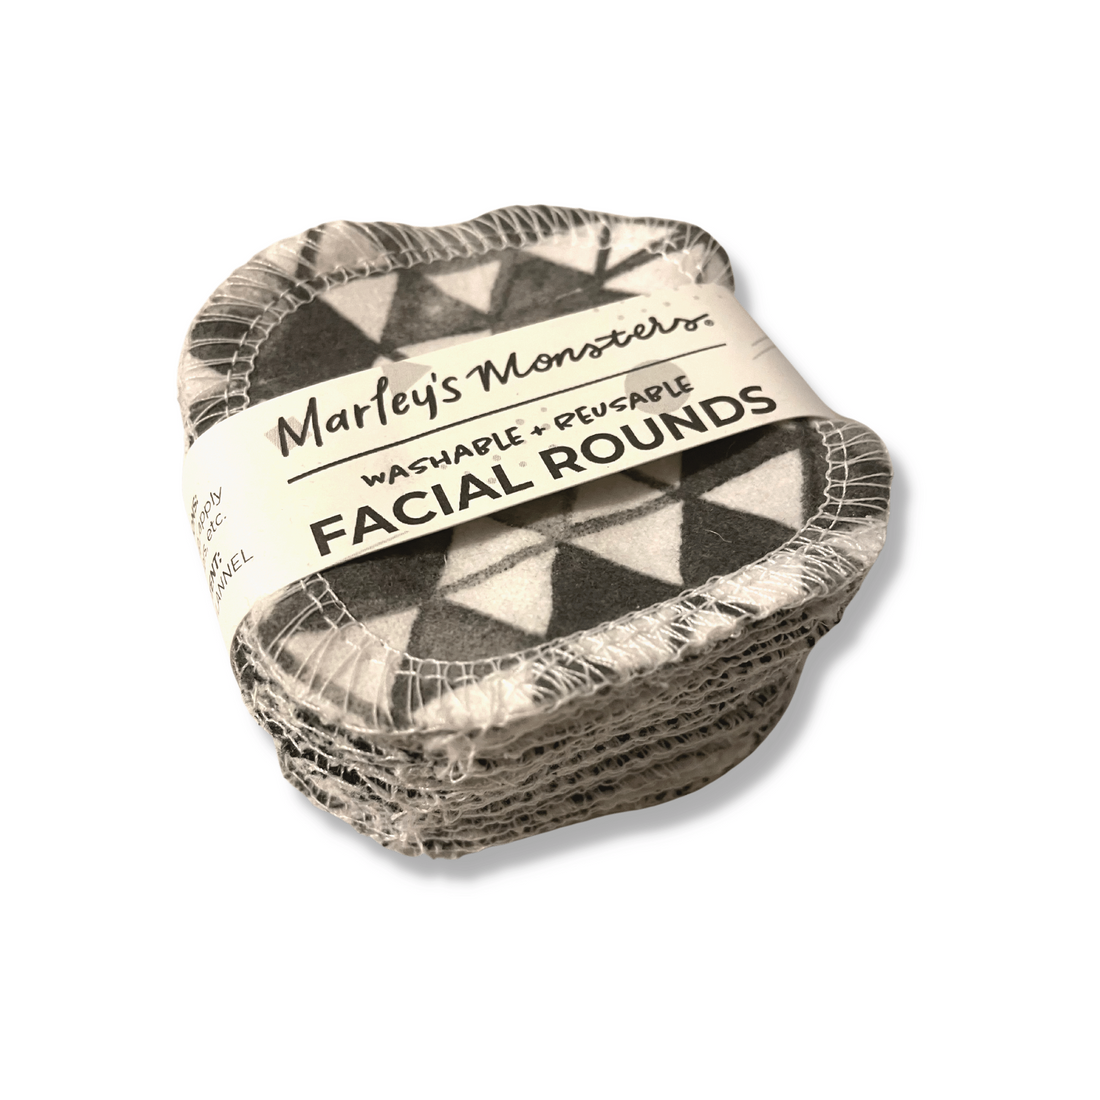 Marleys Monsters Reusable Cotton Facial Rounds, In Black And White Prints.